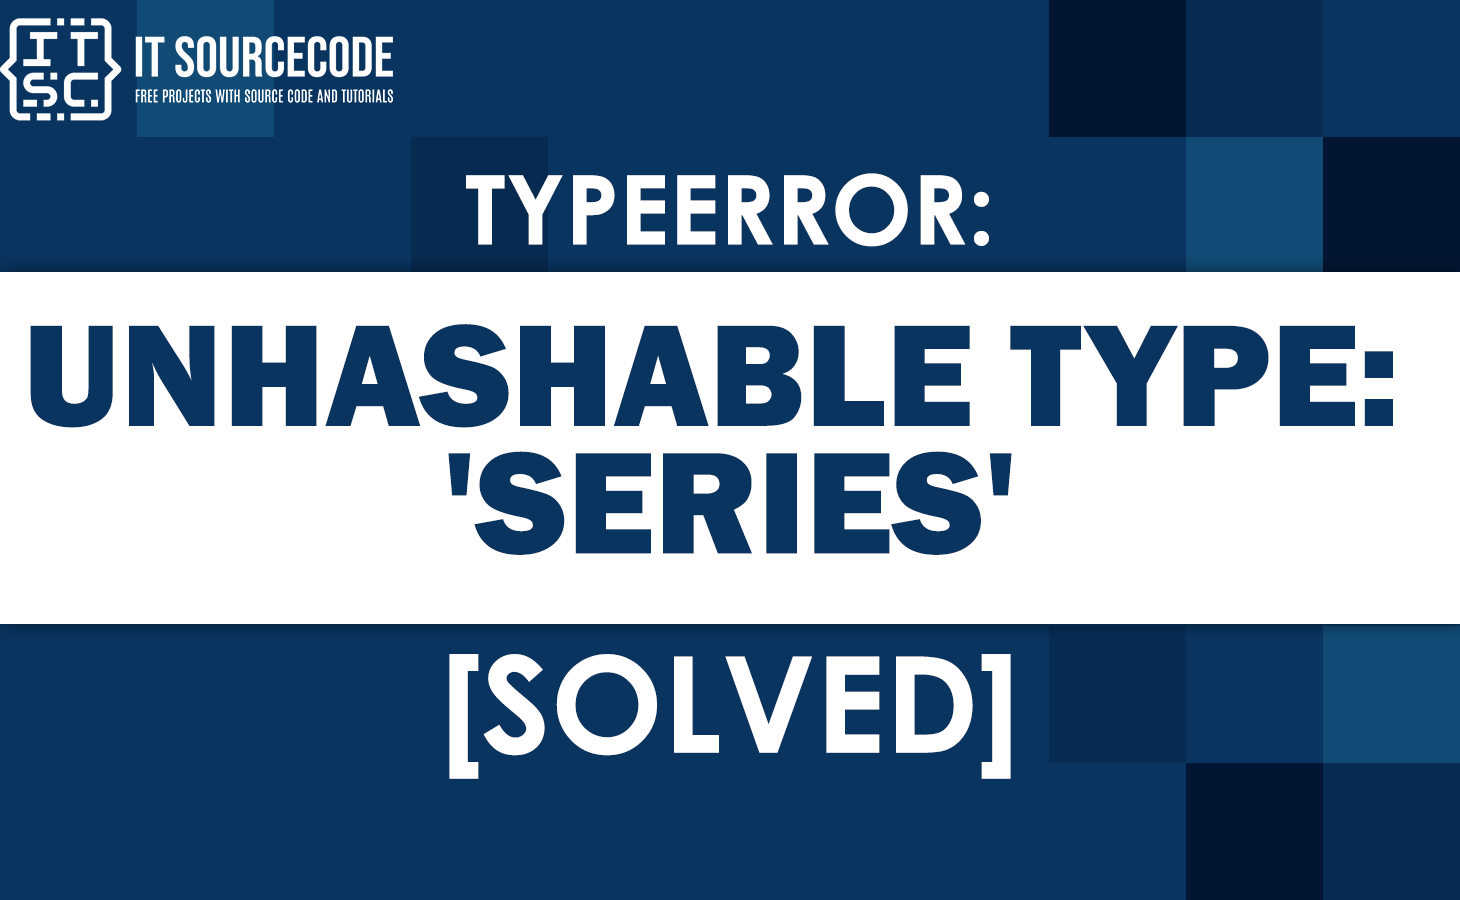 Typeerror Archives - Page 13 Of 18 - Itsourcecode.Com